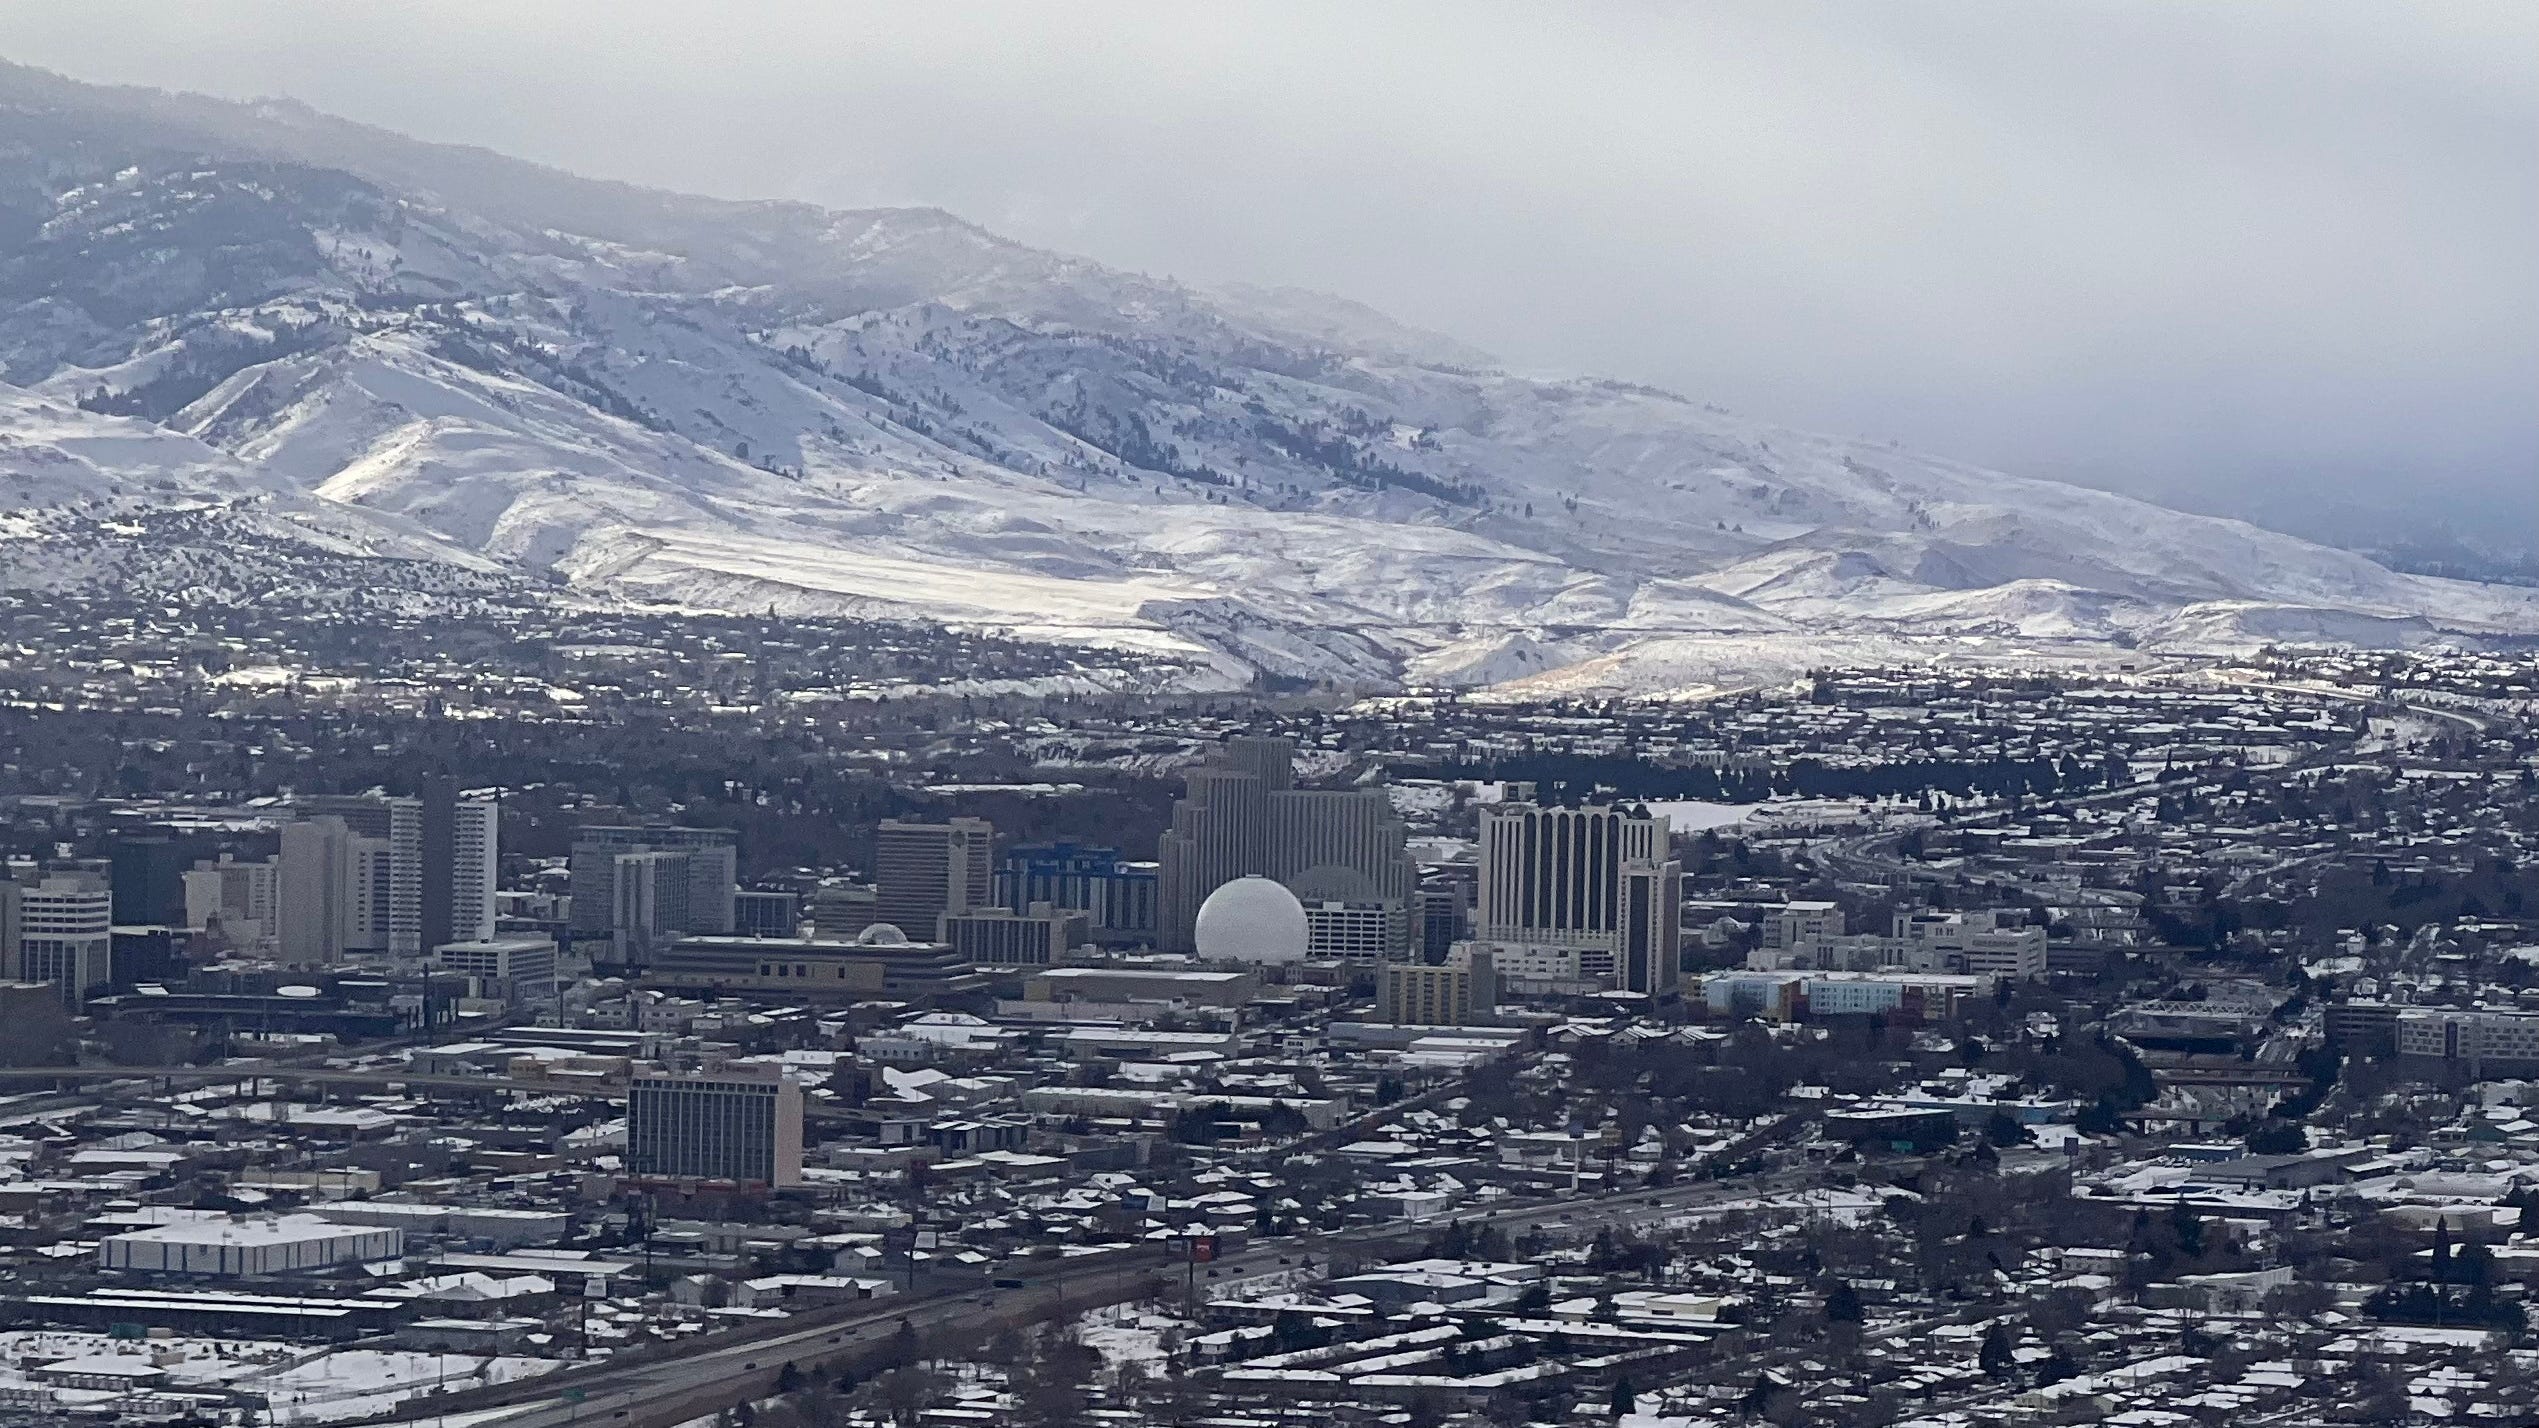 Reno falls to 4th most populous city in Nevada